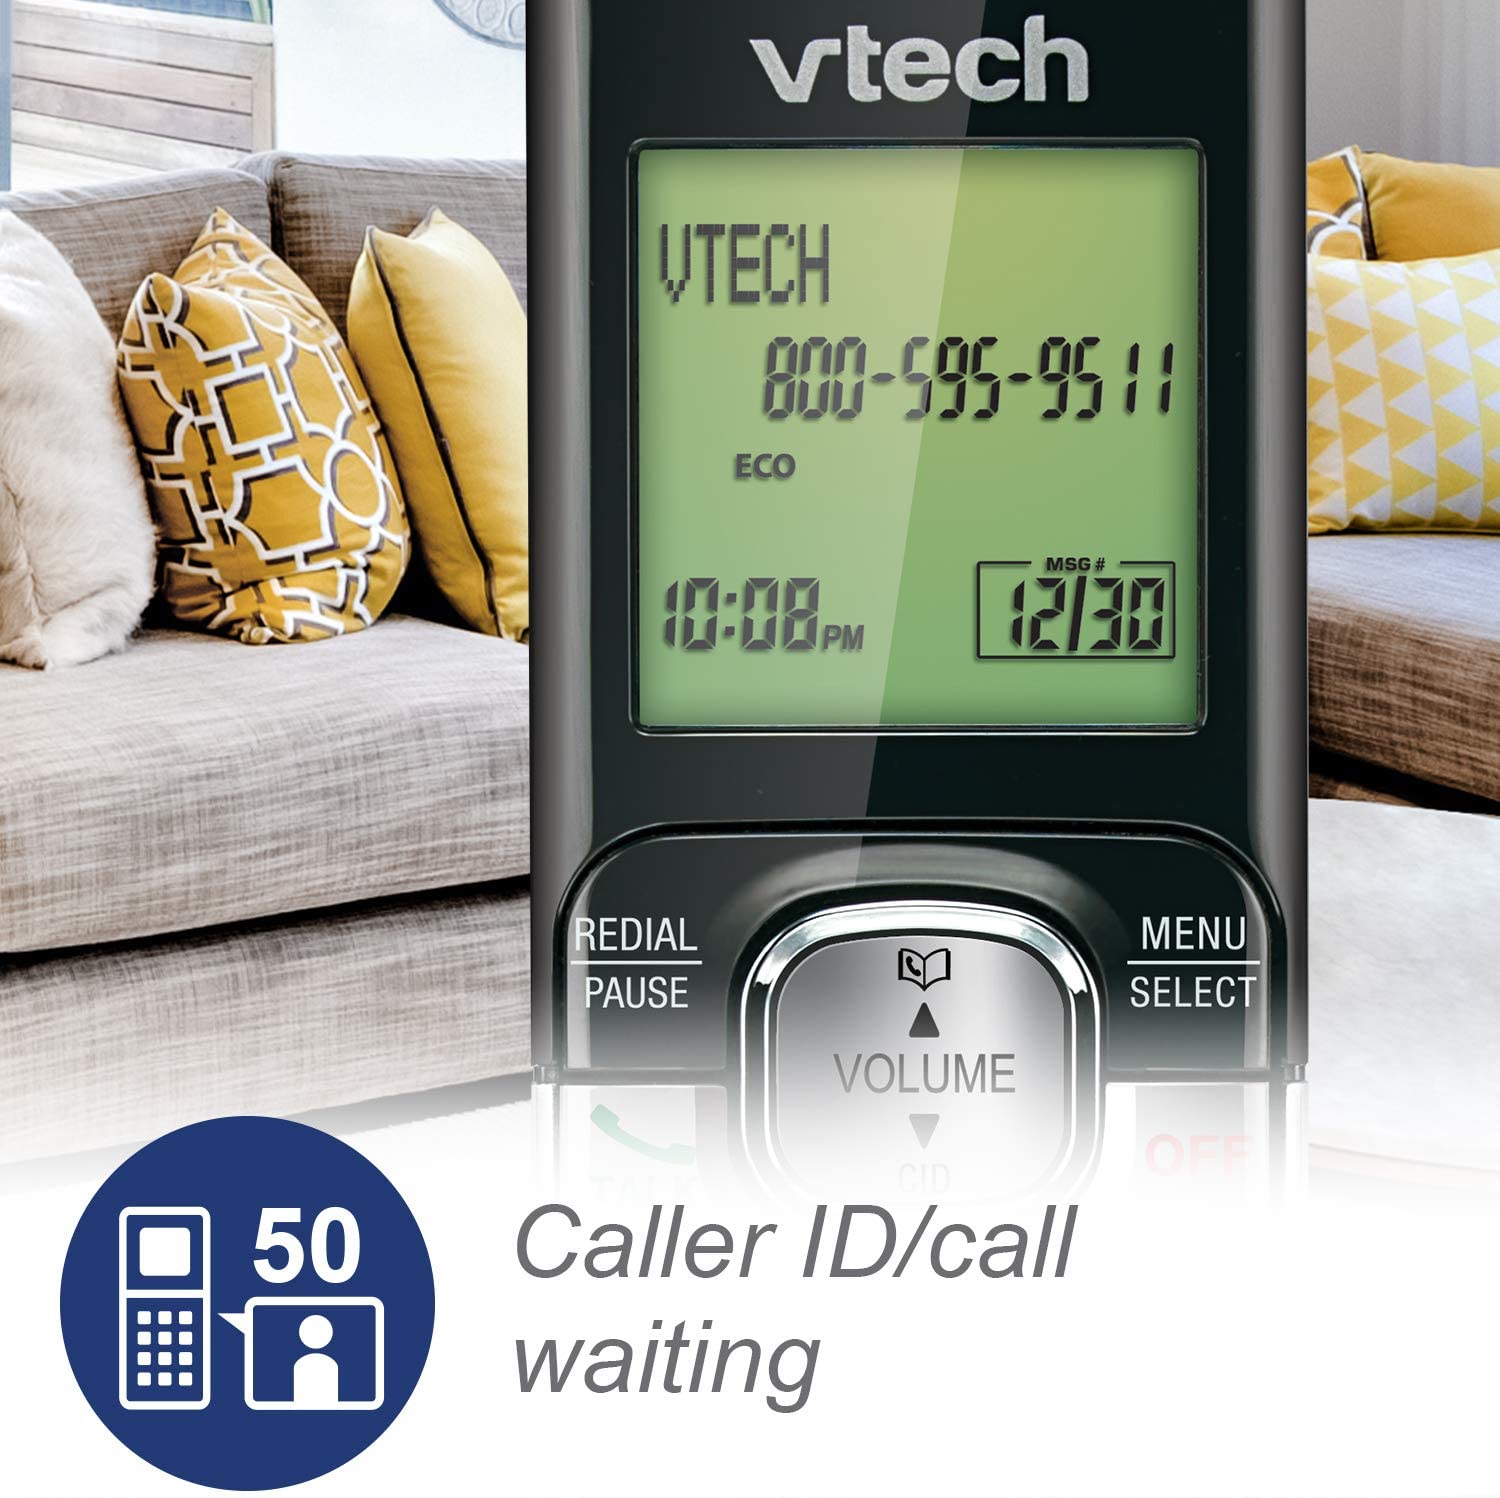 VTech CS6529 DECT 6.0 Phone Answering System with Caller ID/Call Waiting, 1  Cordless Handset, Silver/Black